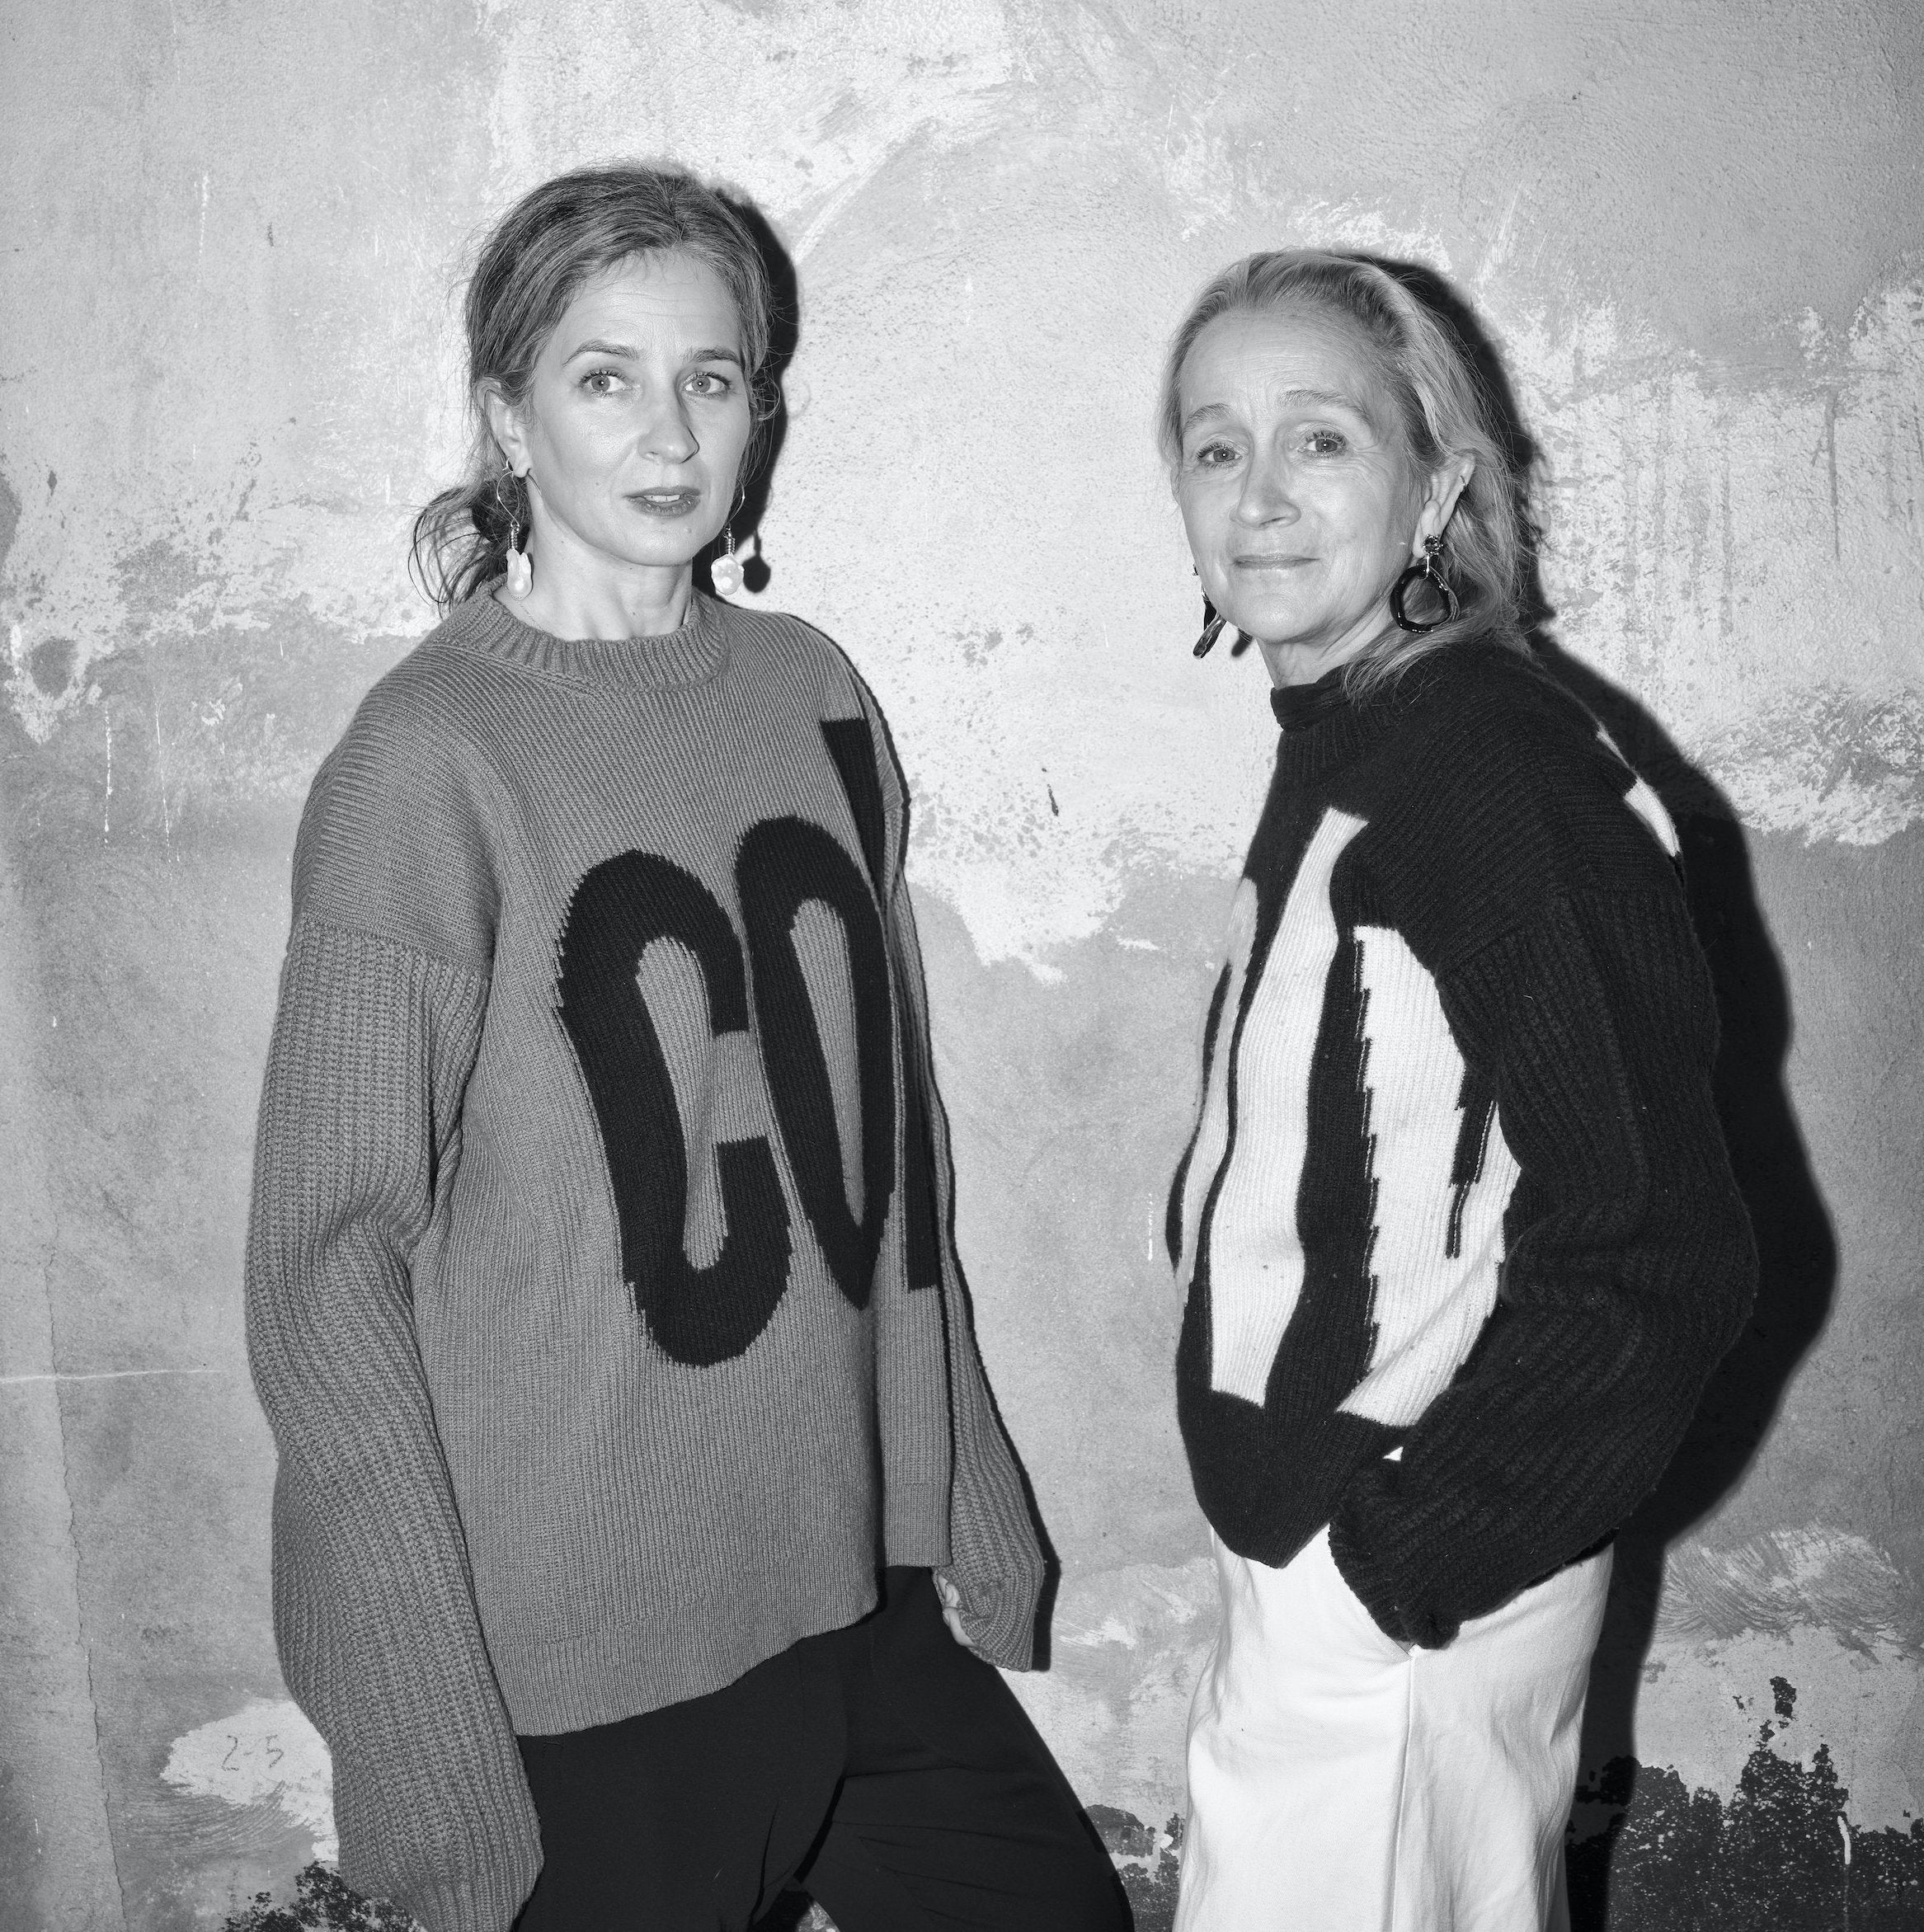 Image Photo of Colville Designers Molly Molloy and Lucinda Chambers